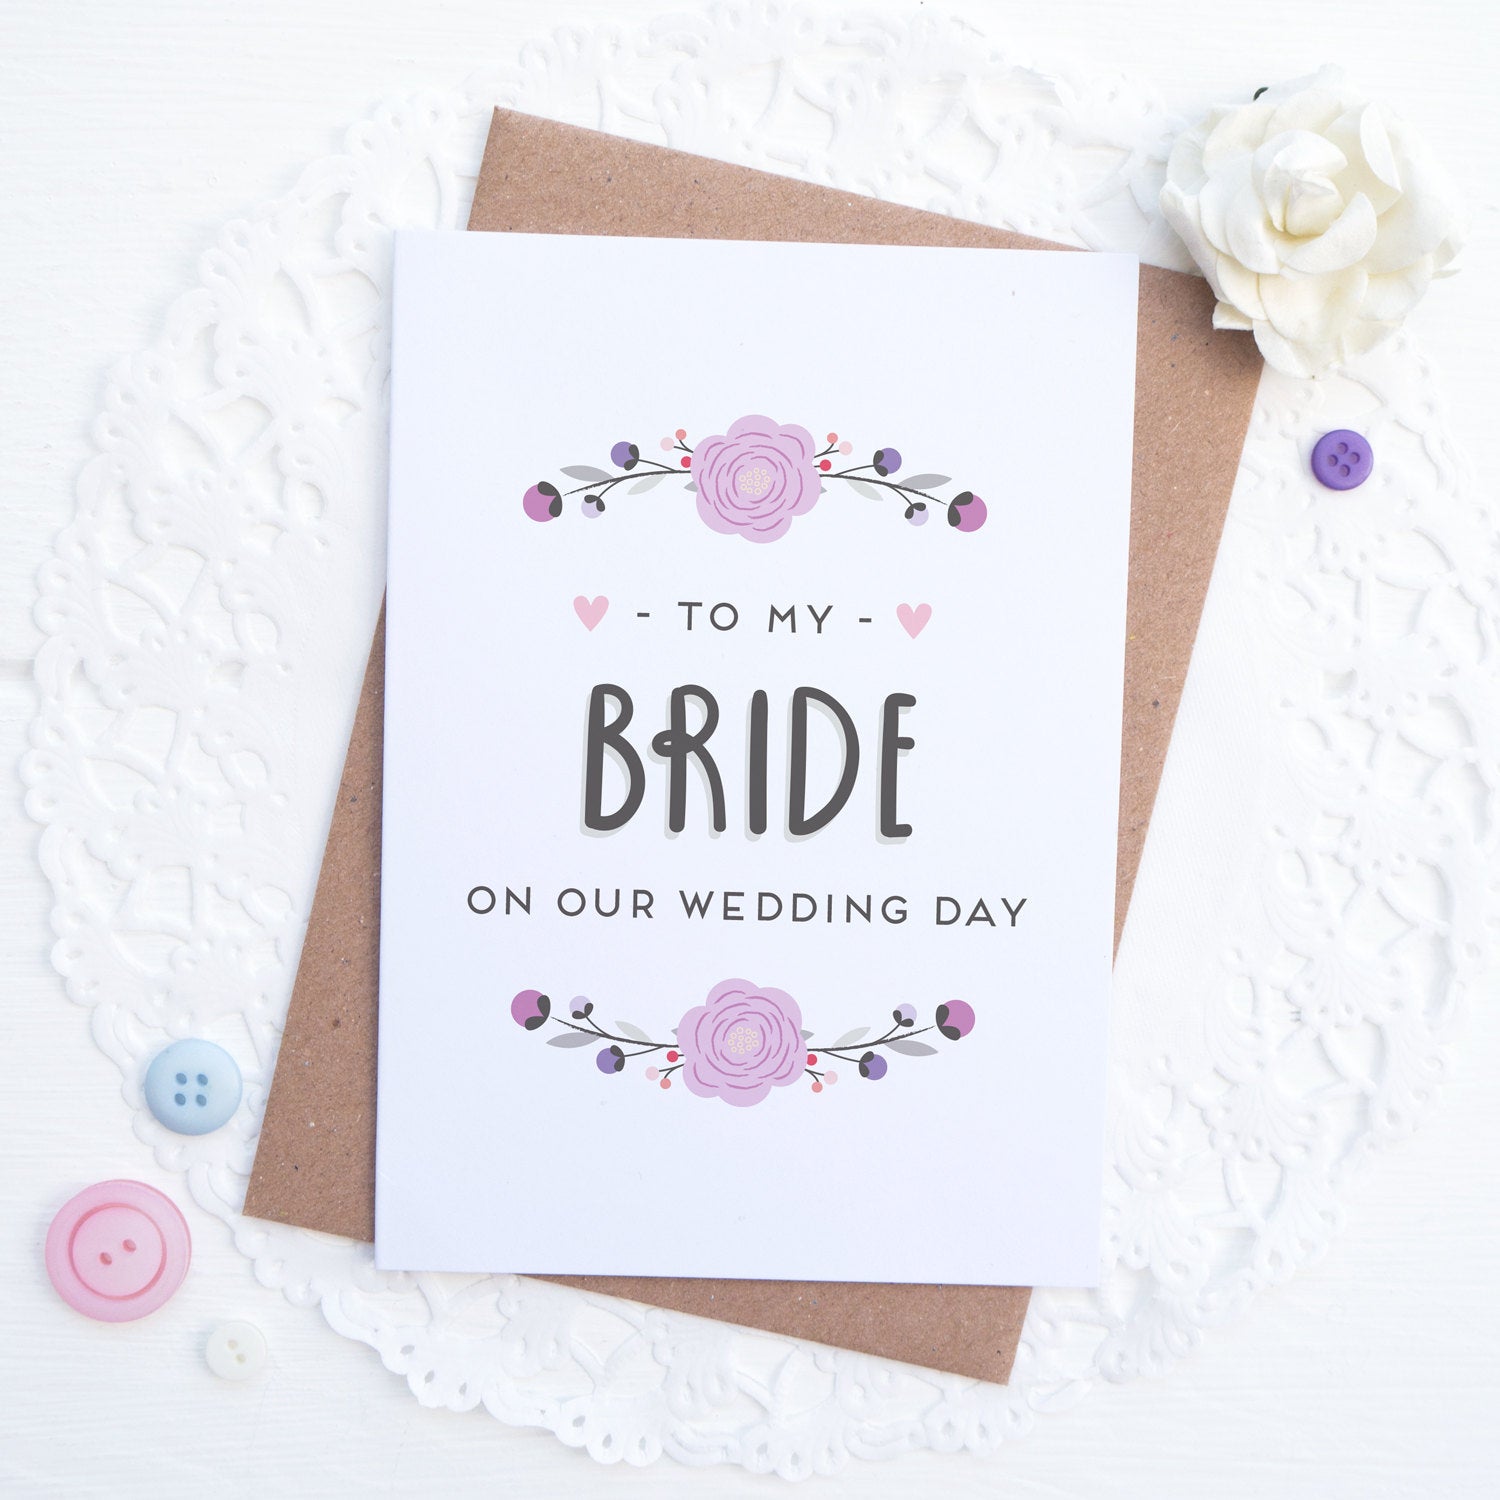 To my bride on our wedding day card in purple